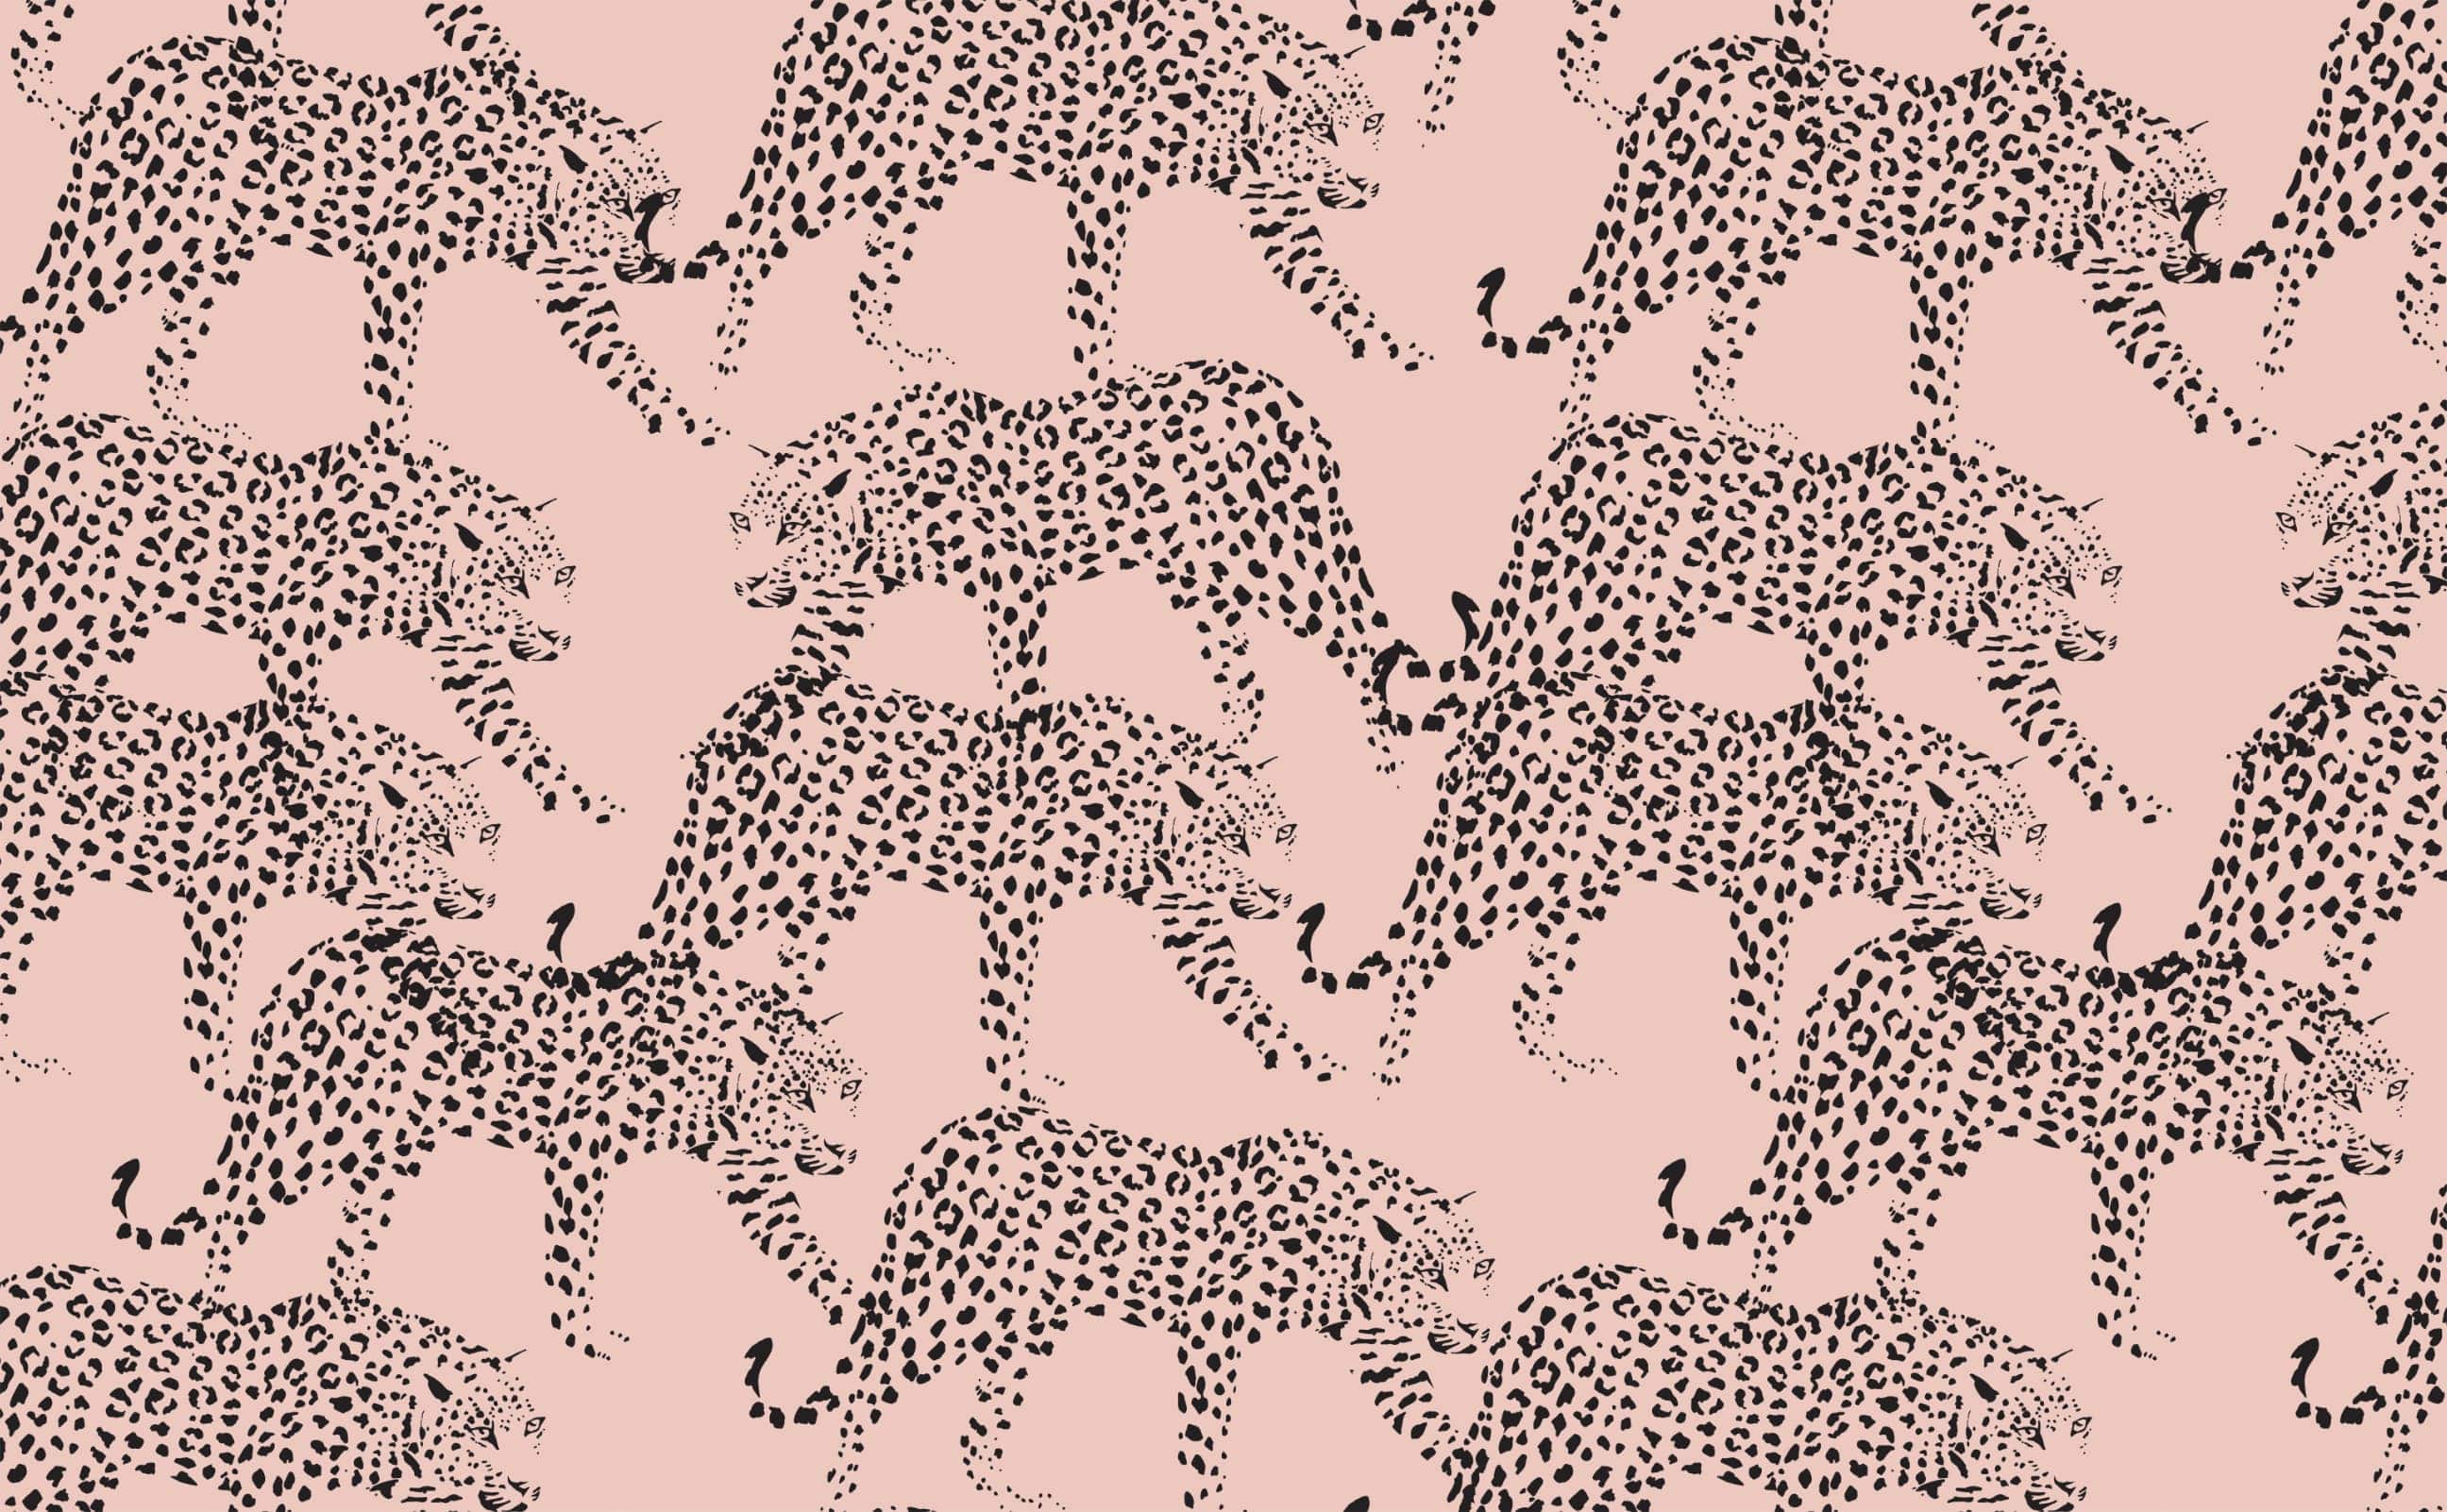 Dusty rose with black leopard illustrated overlay Pattern Wallpaper for Walls. Prowl and Purr